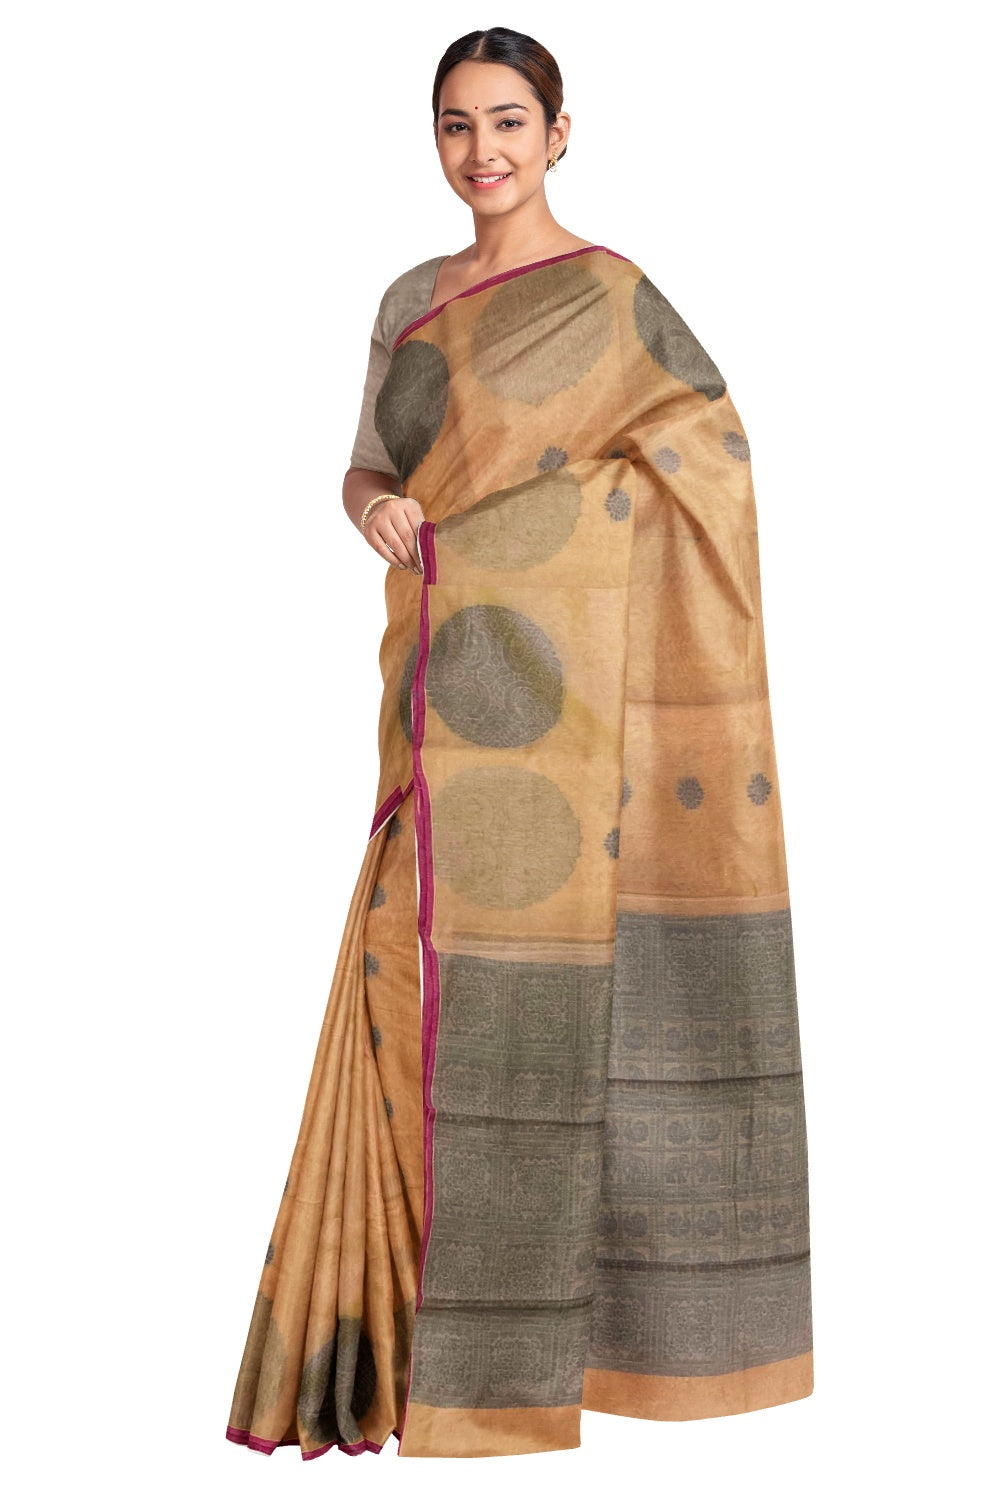 Southloom Sico Gadwal Semi Silk Saree in Light Brown and Grey with Elephant Motifs (Blouse Piece with Work)